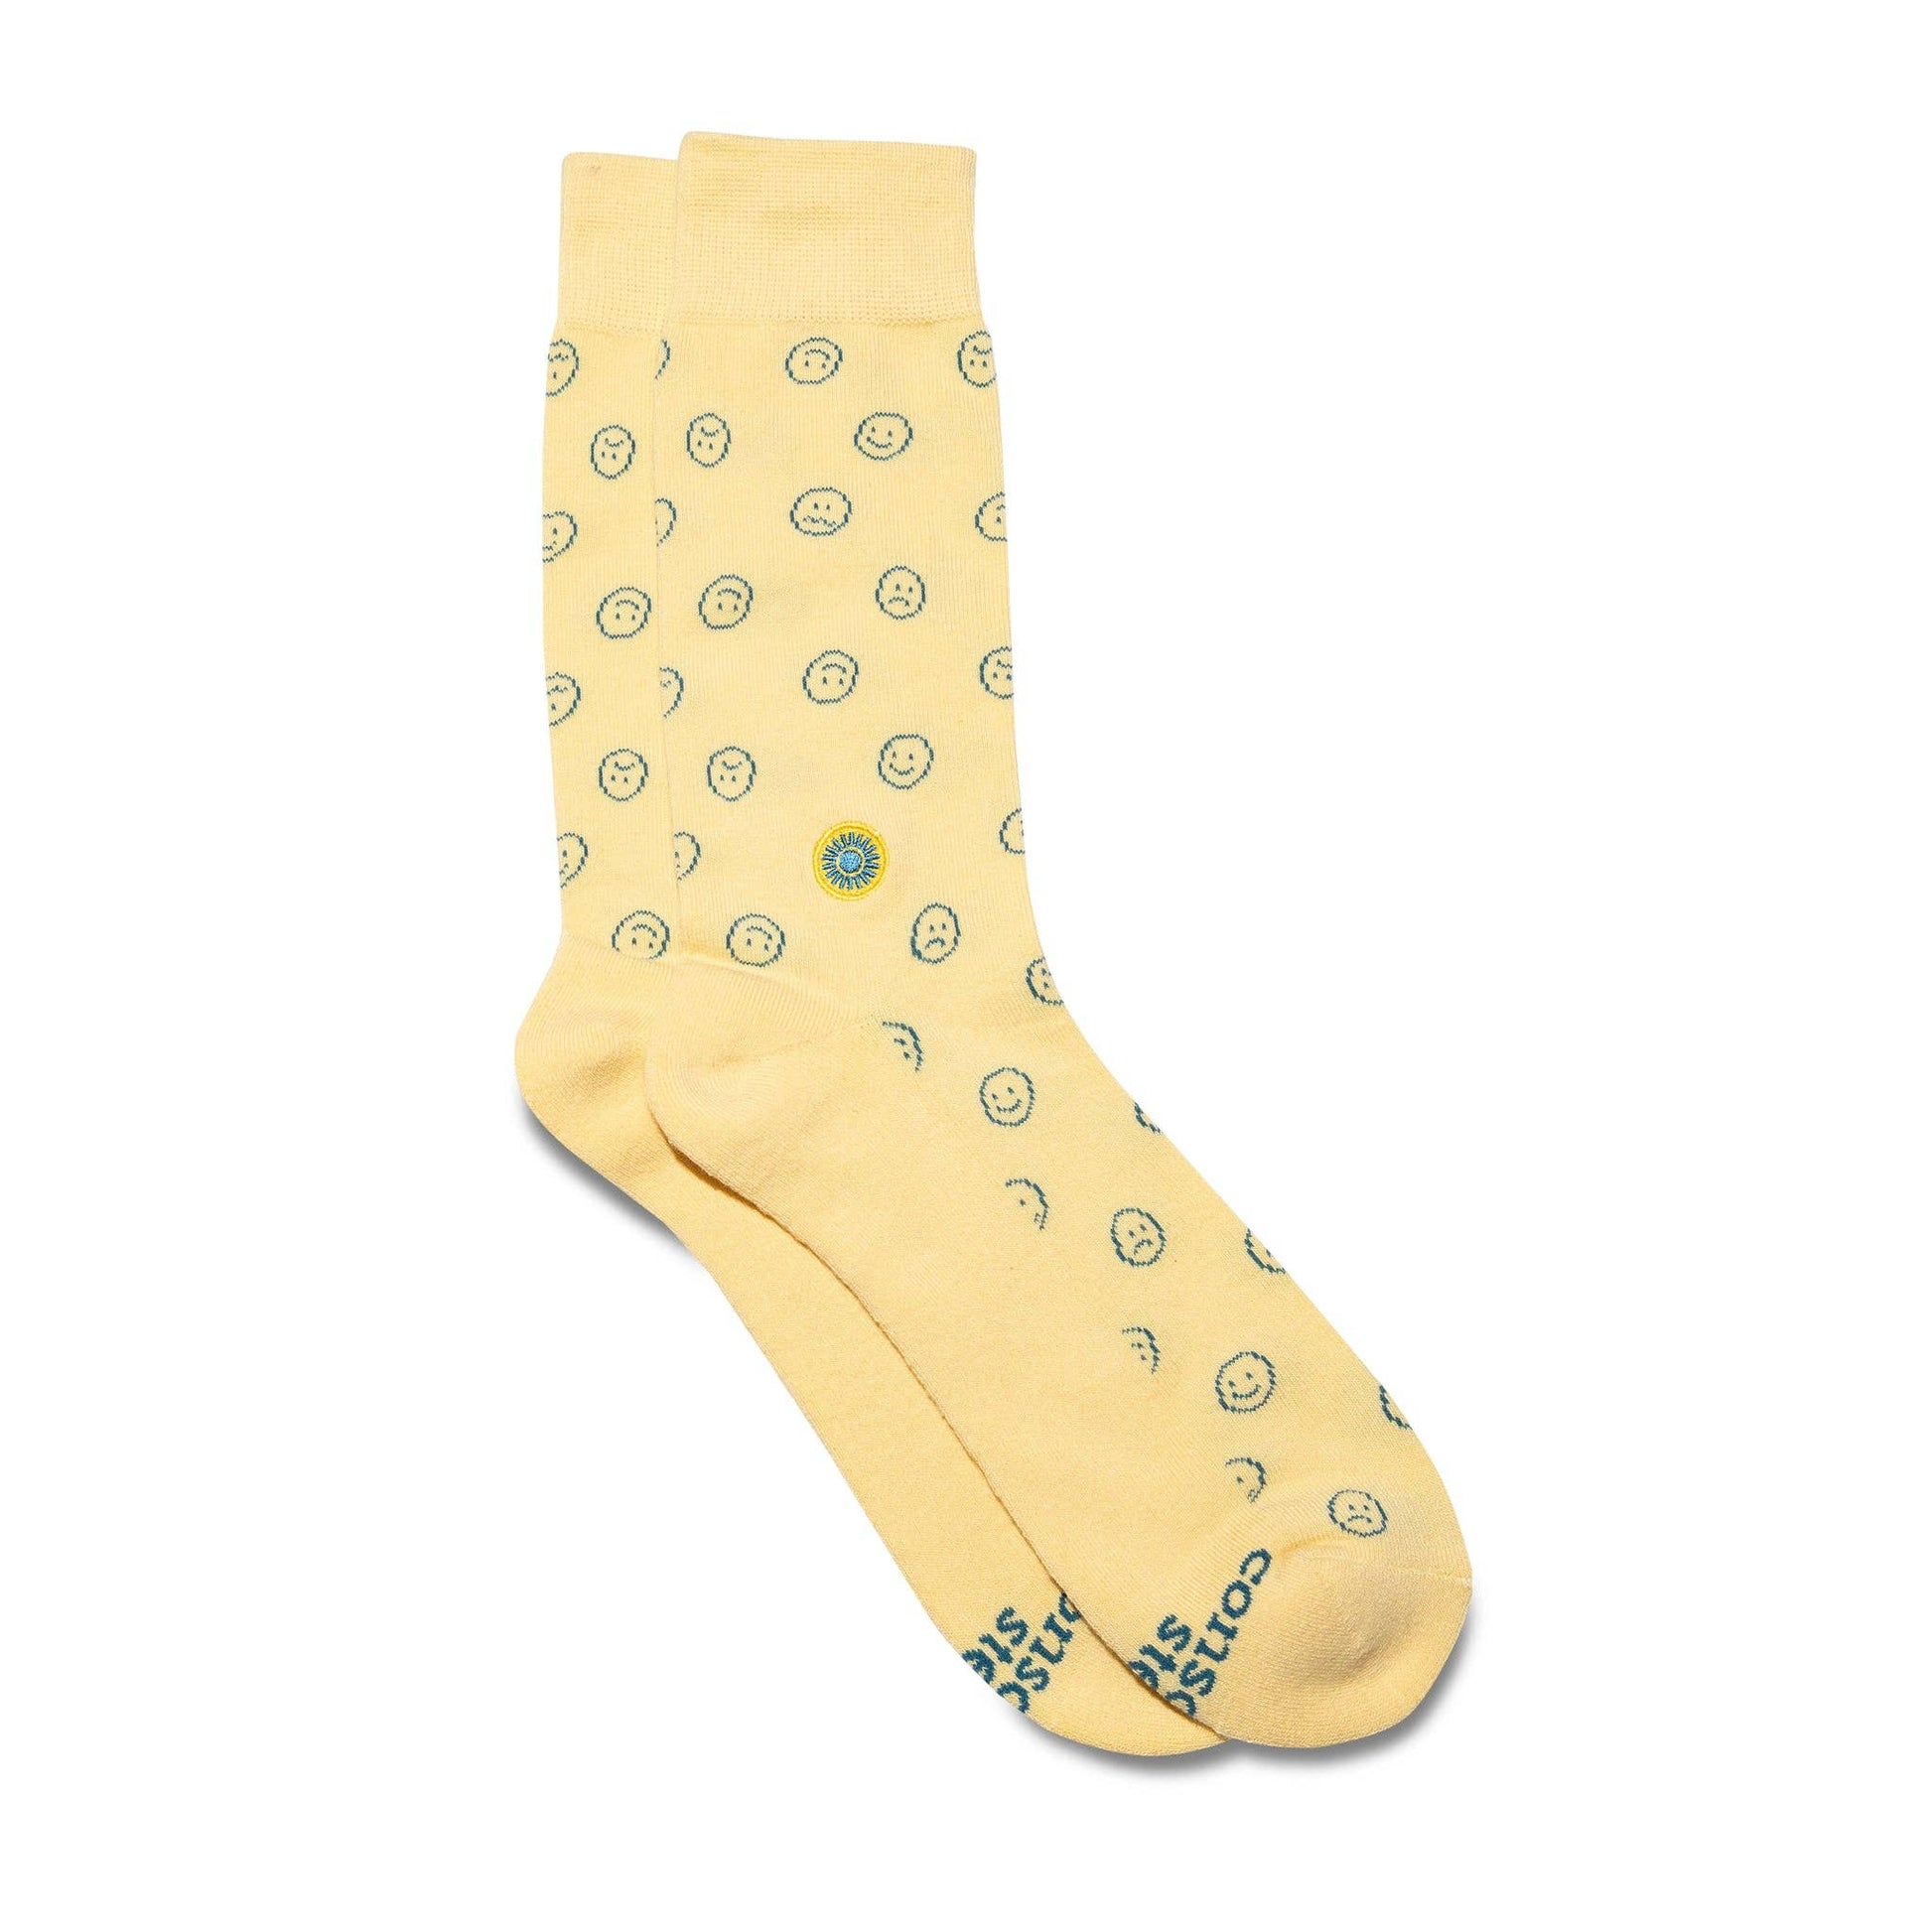 Conscious Step - Socks that Support Mental Health (Smiley Faces)  Conscious Step Small  -better made easy-eco-friendly-sustainable-gifting